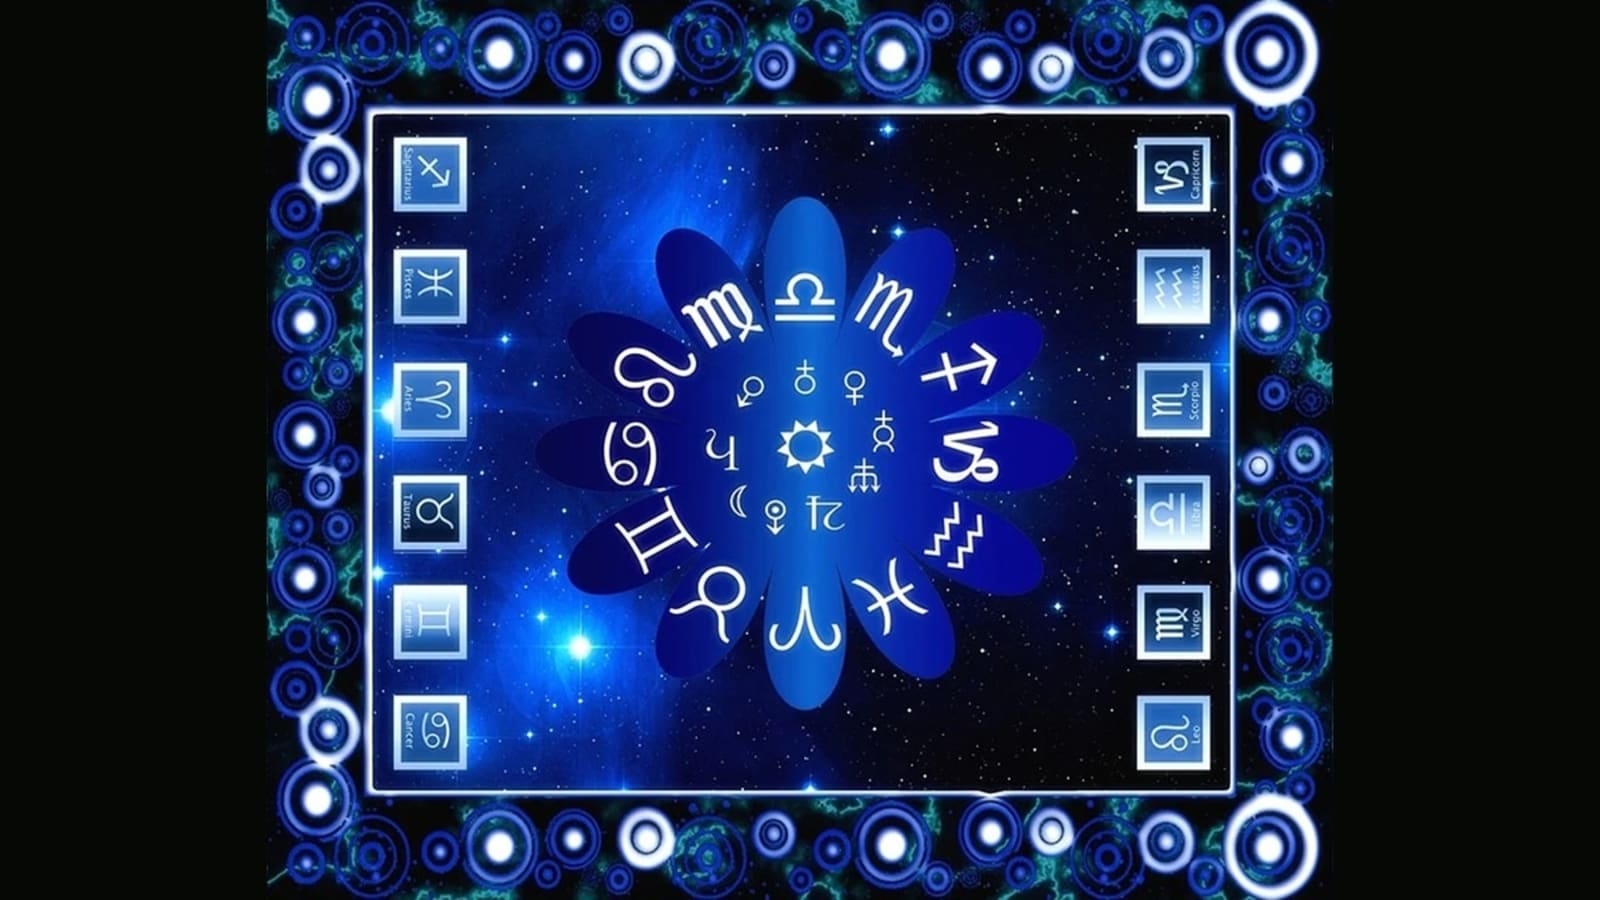 Hindi News: Horoscope Today: Astrological prediction for January 30, 2022